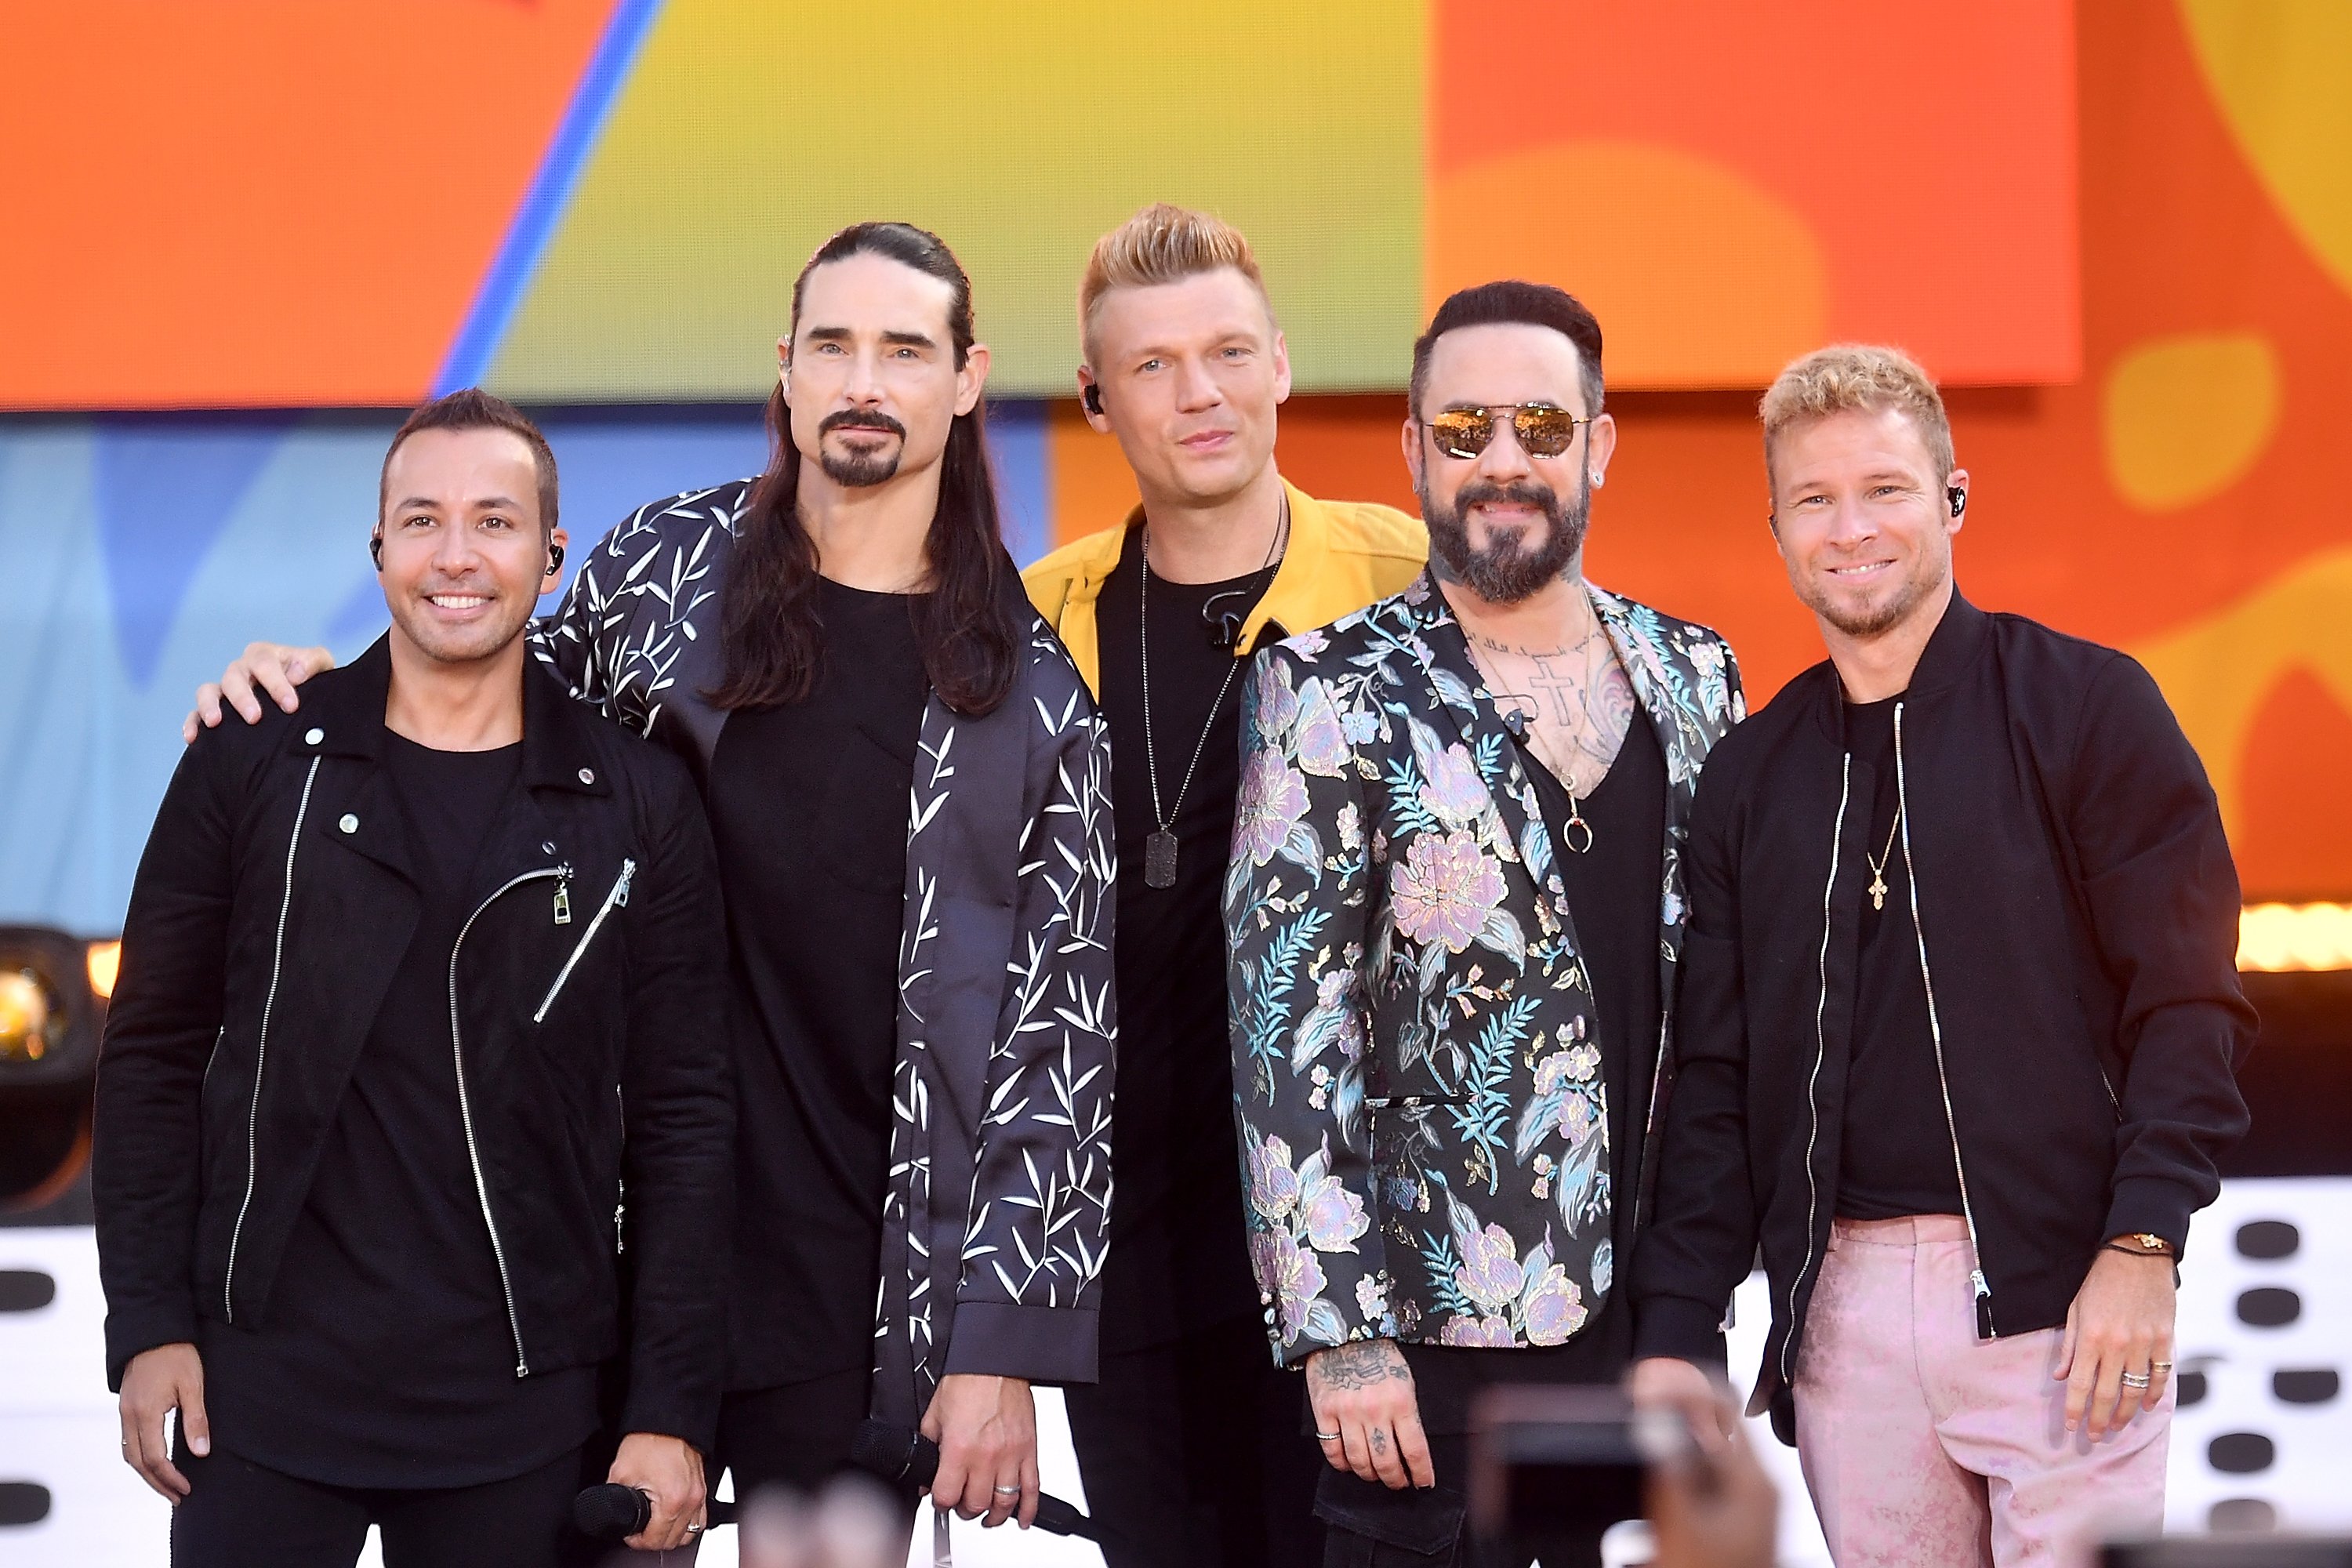 The Backstreet Boys during a performance on ABC's "Good Morning America" at SummerStage at Rumsey Playfield, Central Park on July 13, 2018 in New York City. | Photo: Getty Images